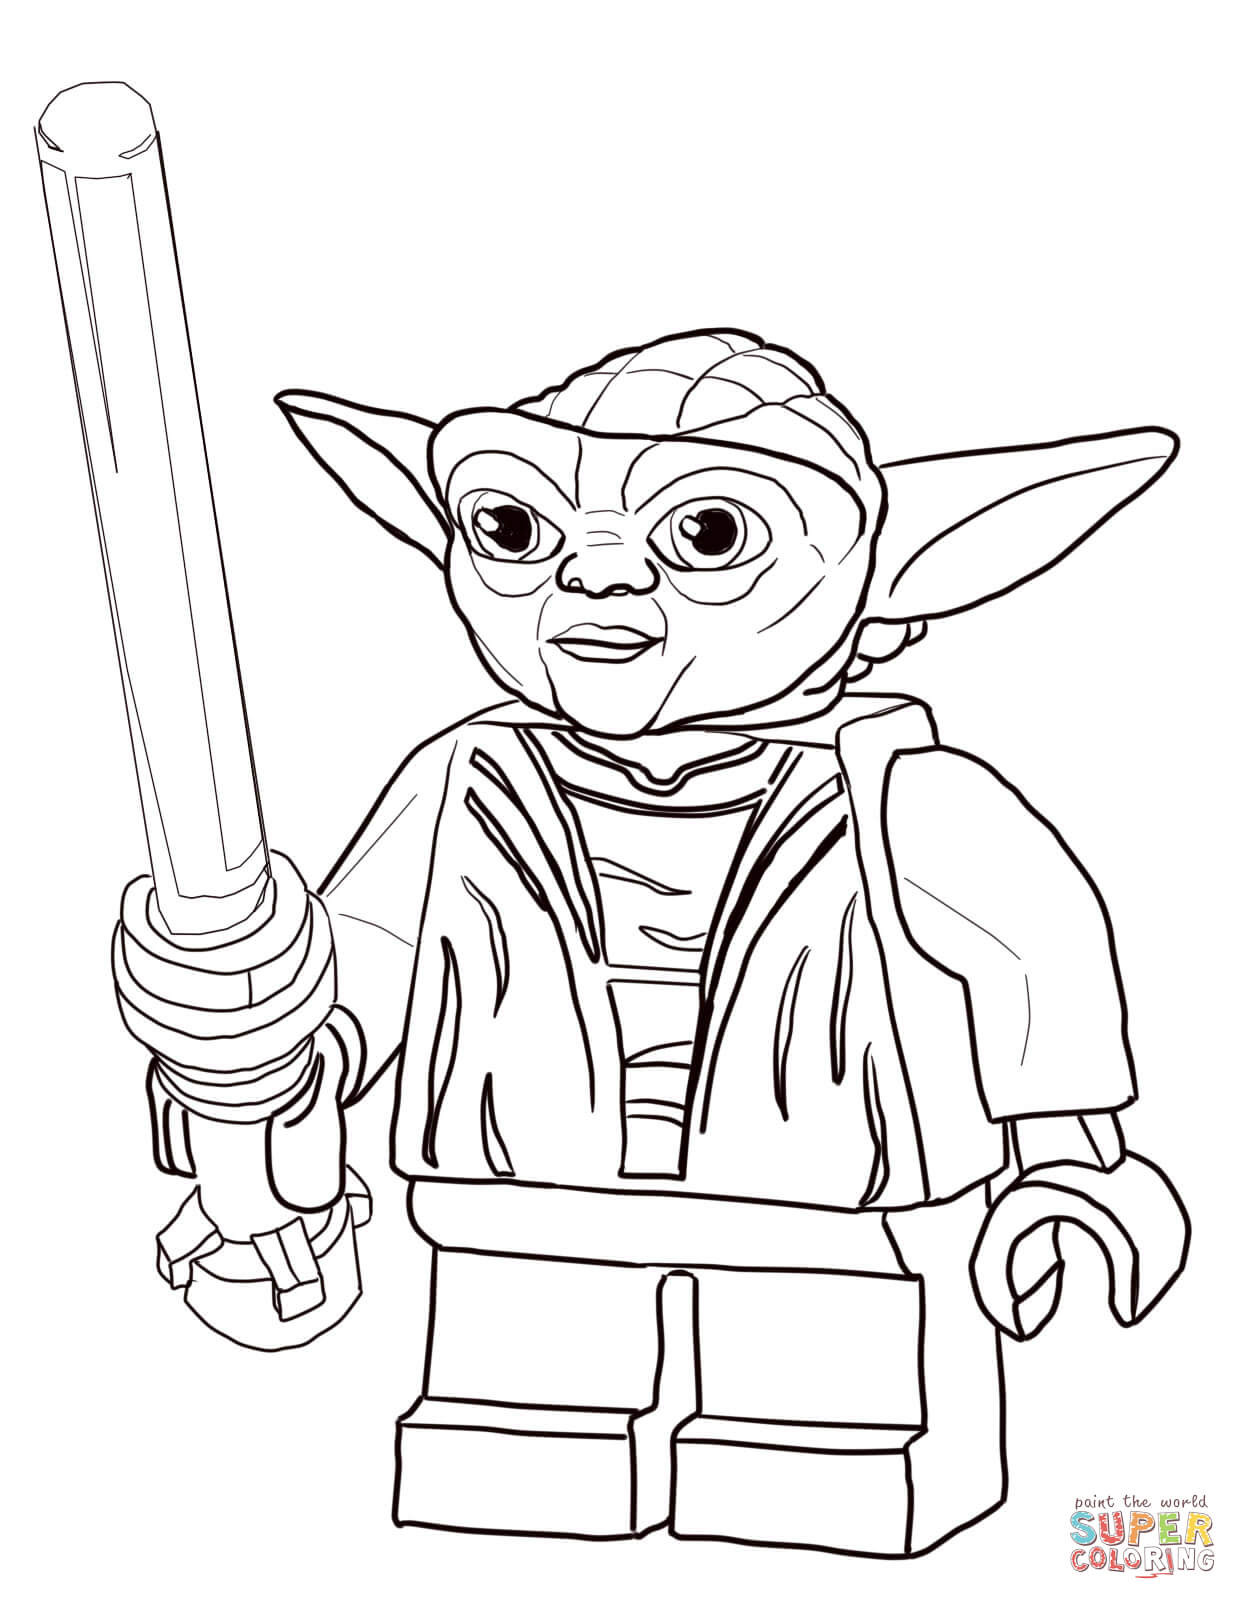 Lego Star Wars Printable Coloring Pages
 Lego Star Wars Master Yoda coloring page